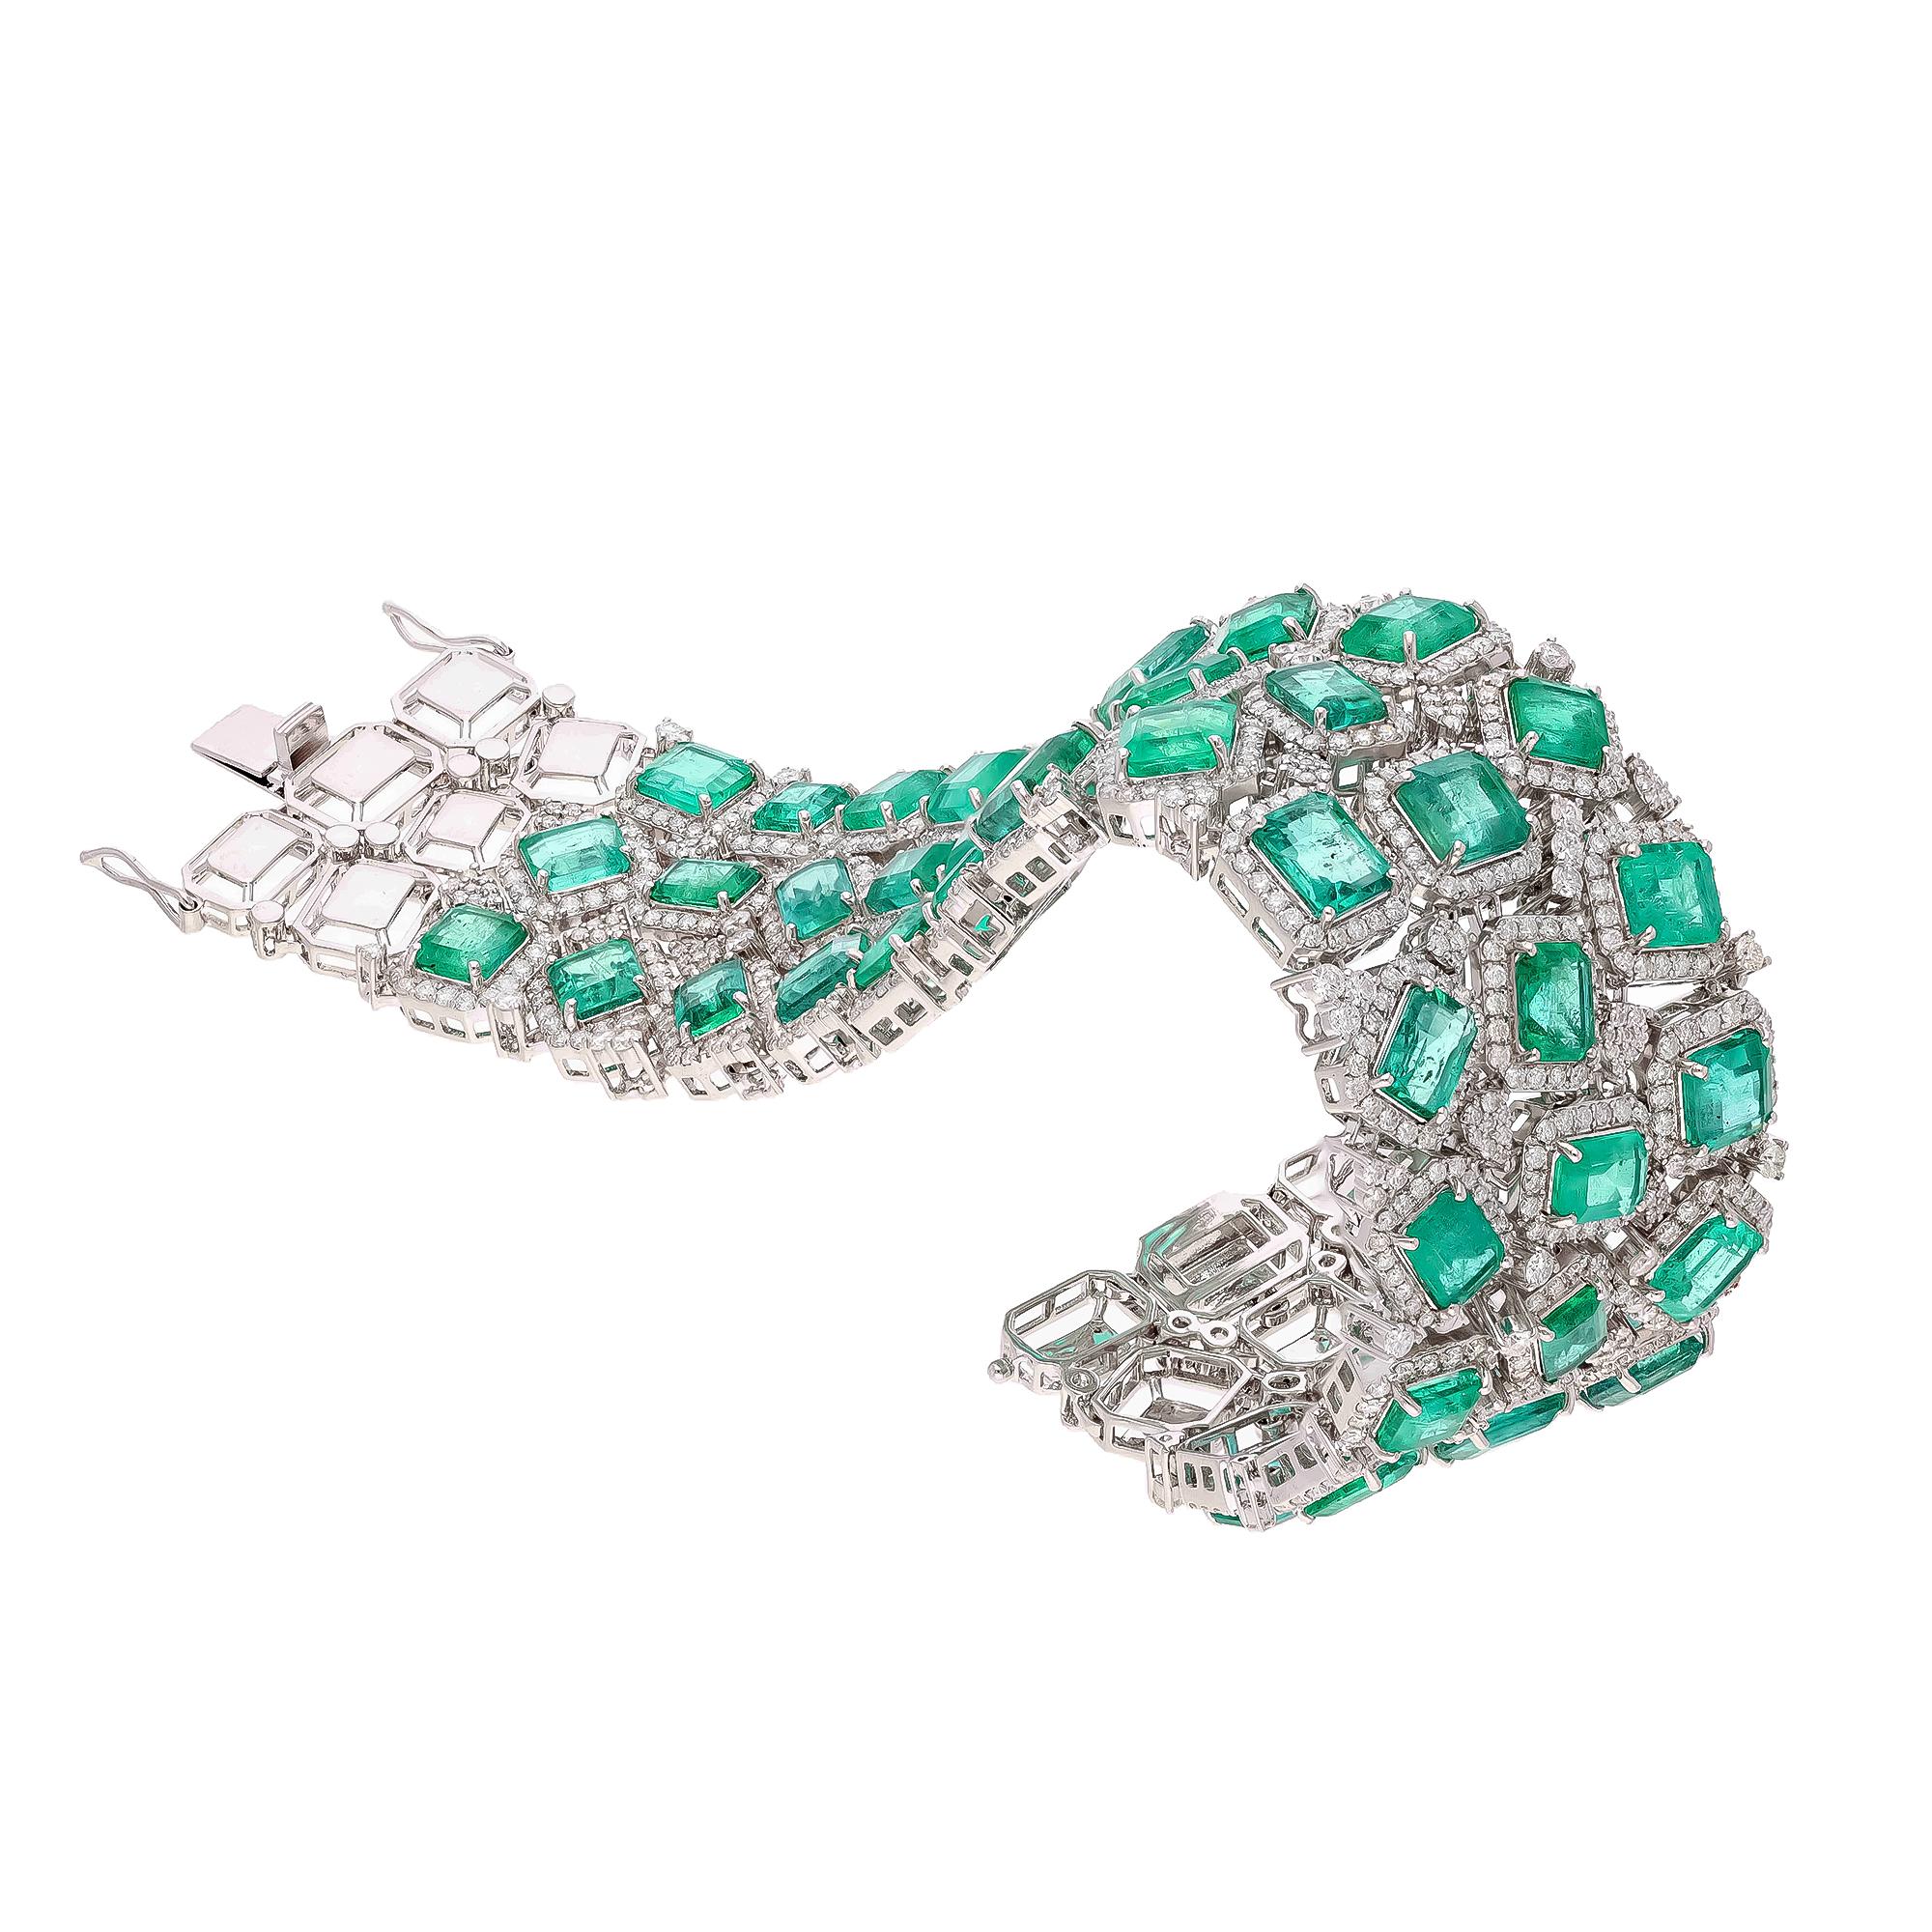 This is a stunning natural Zambian Emerald bracelet which has Emerald of very high quality and diamonds of very good quality . it has vsi clarity and G colour.

Emerald : 49.88cts

diamonds : 10.83 cts

gold : 76.148 gms

Its very hard to capture